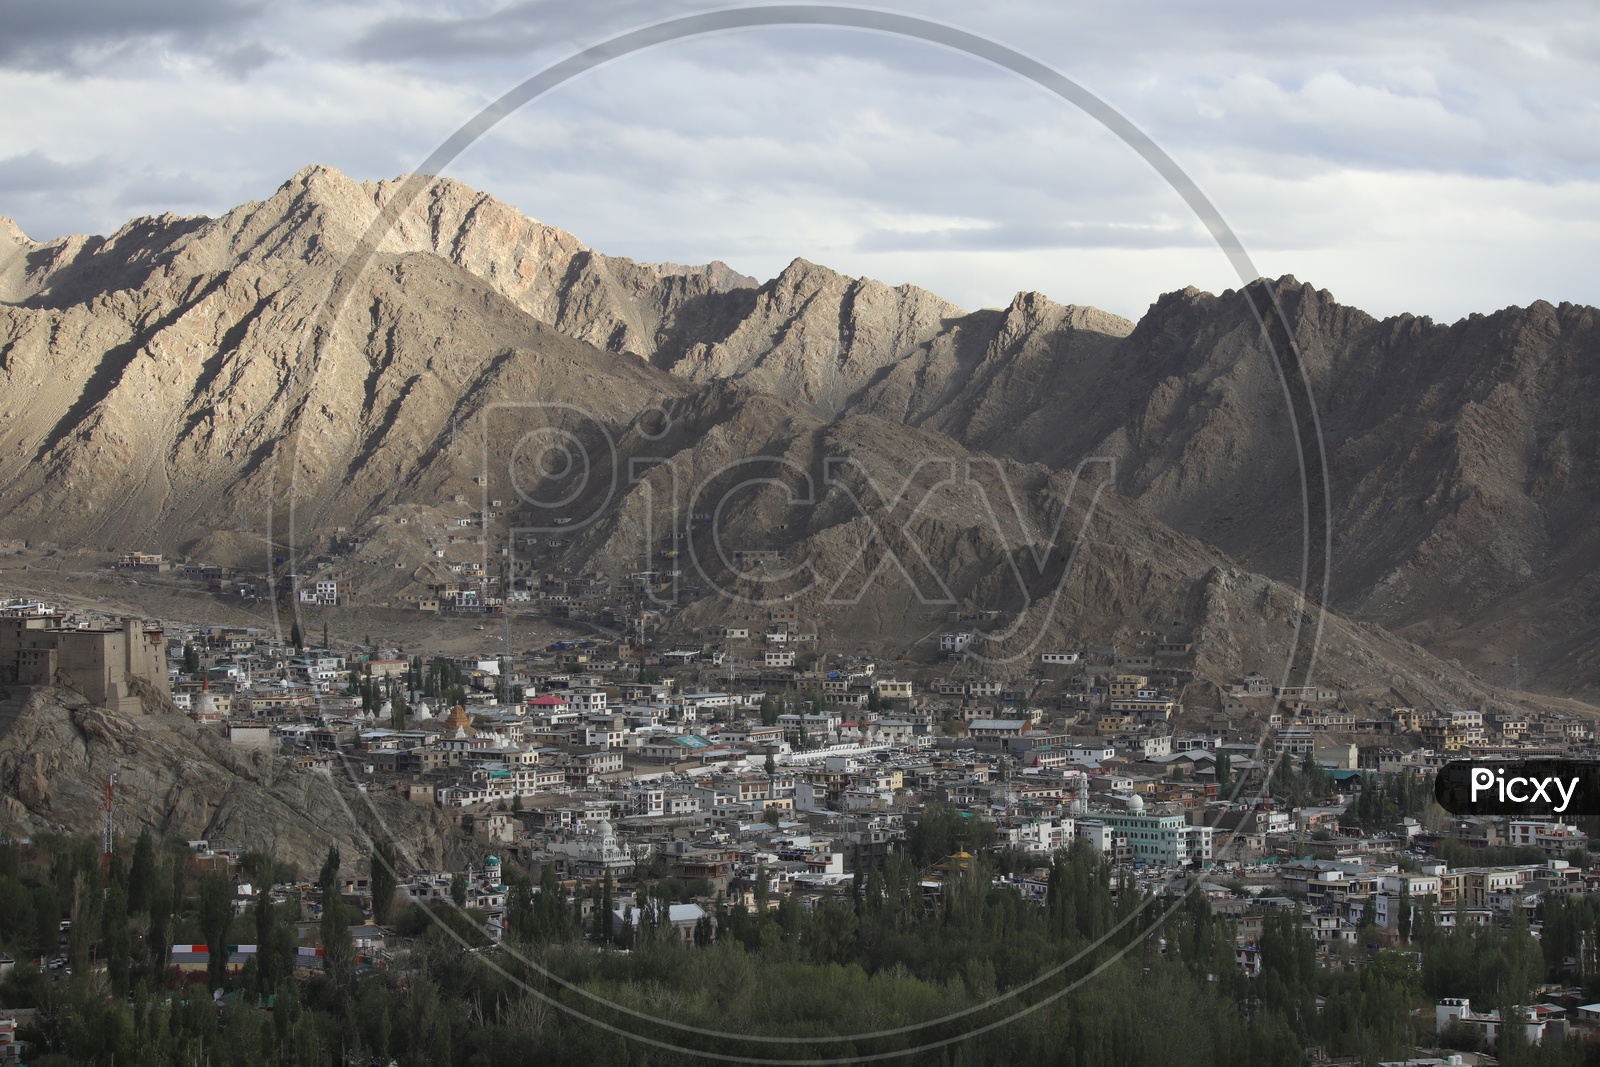 Snow Capped mountains of Leh with village in the foreground